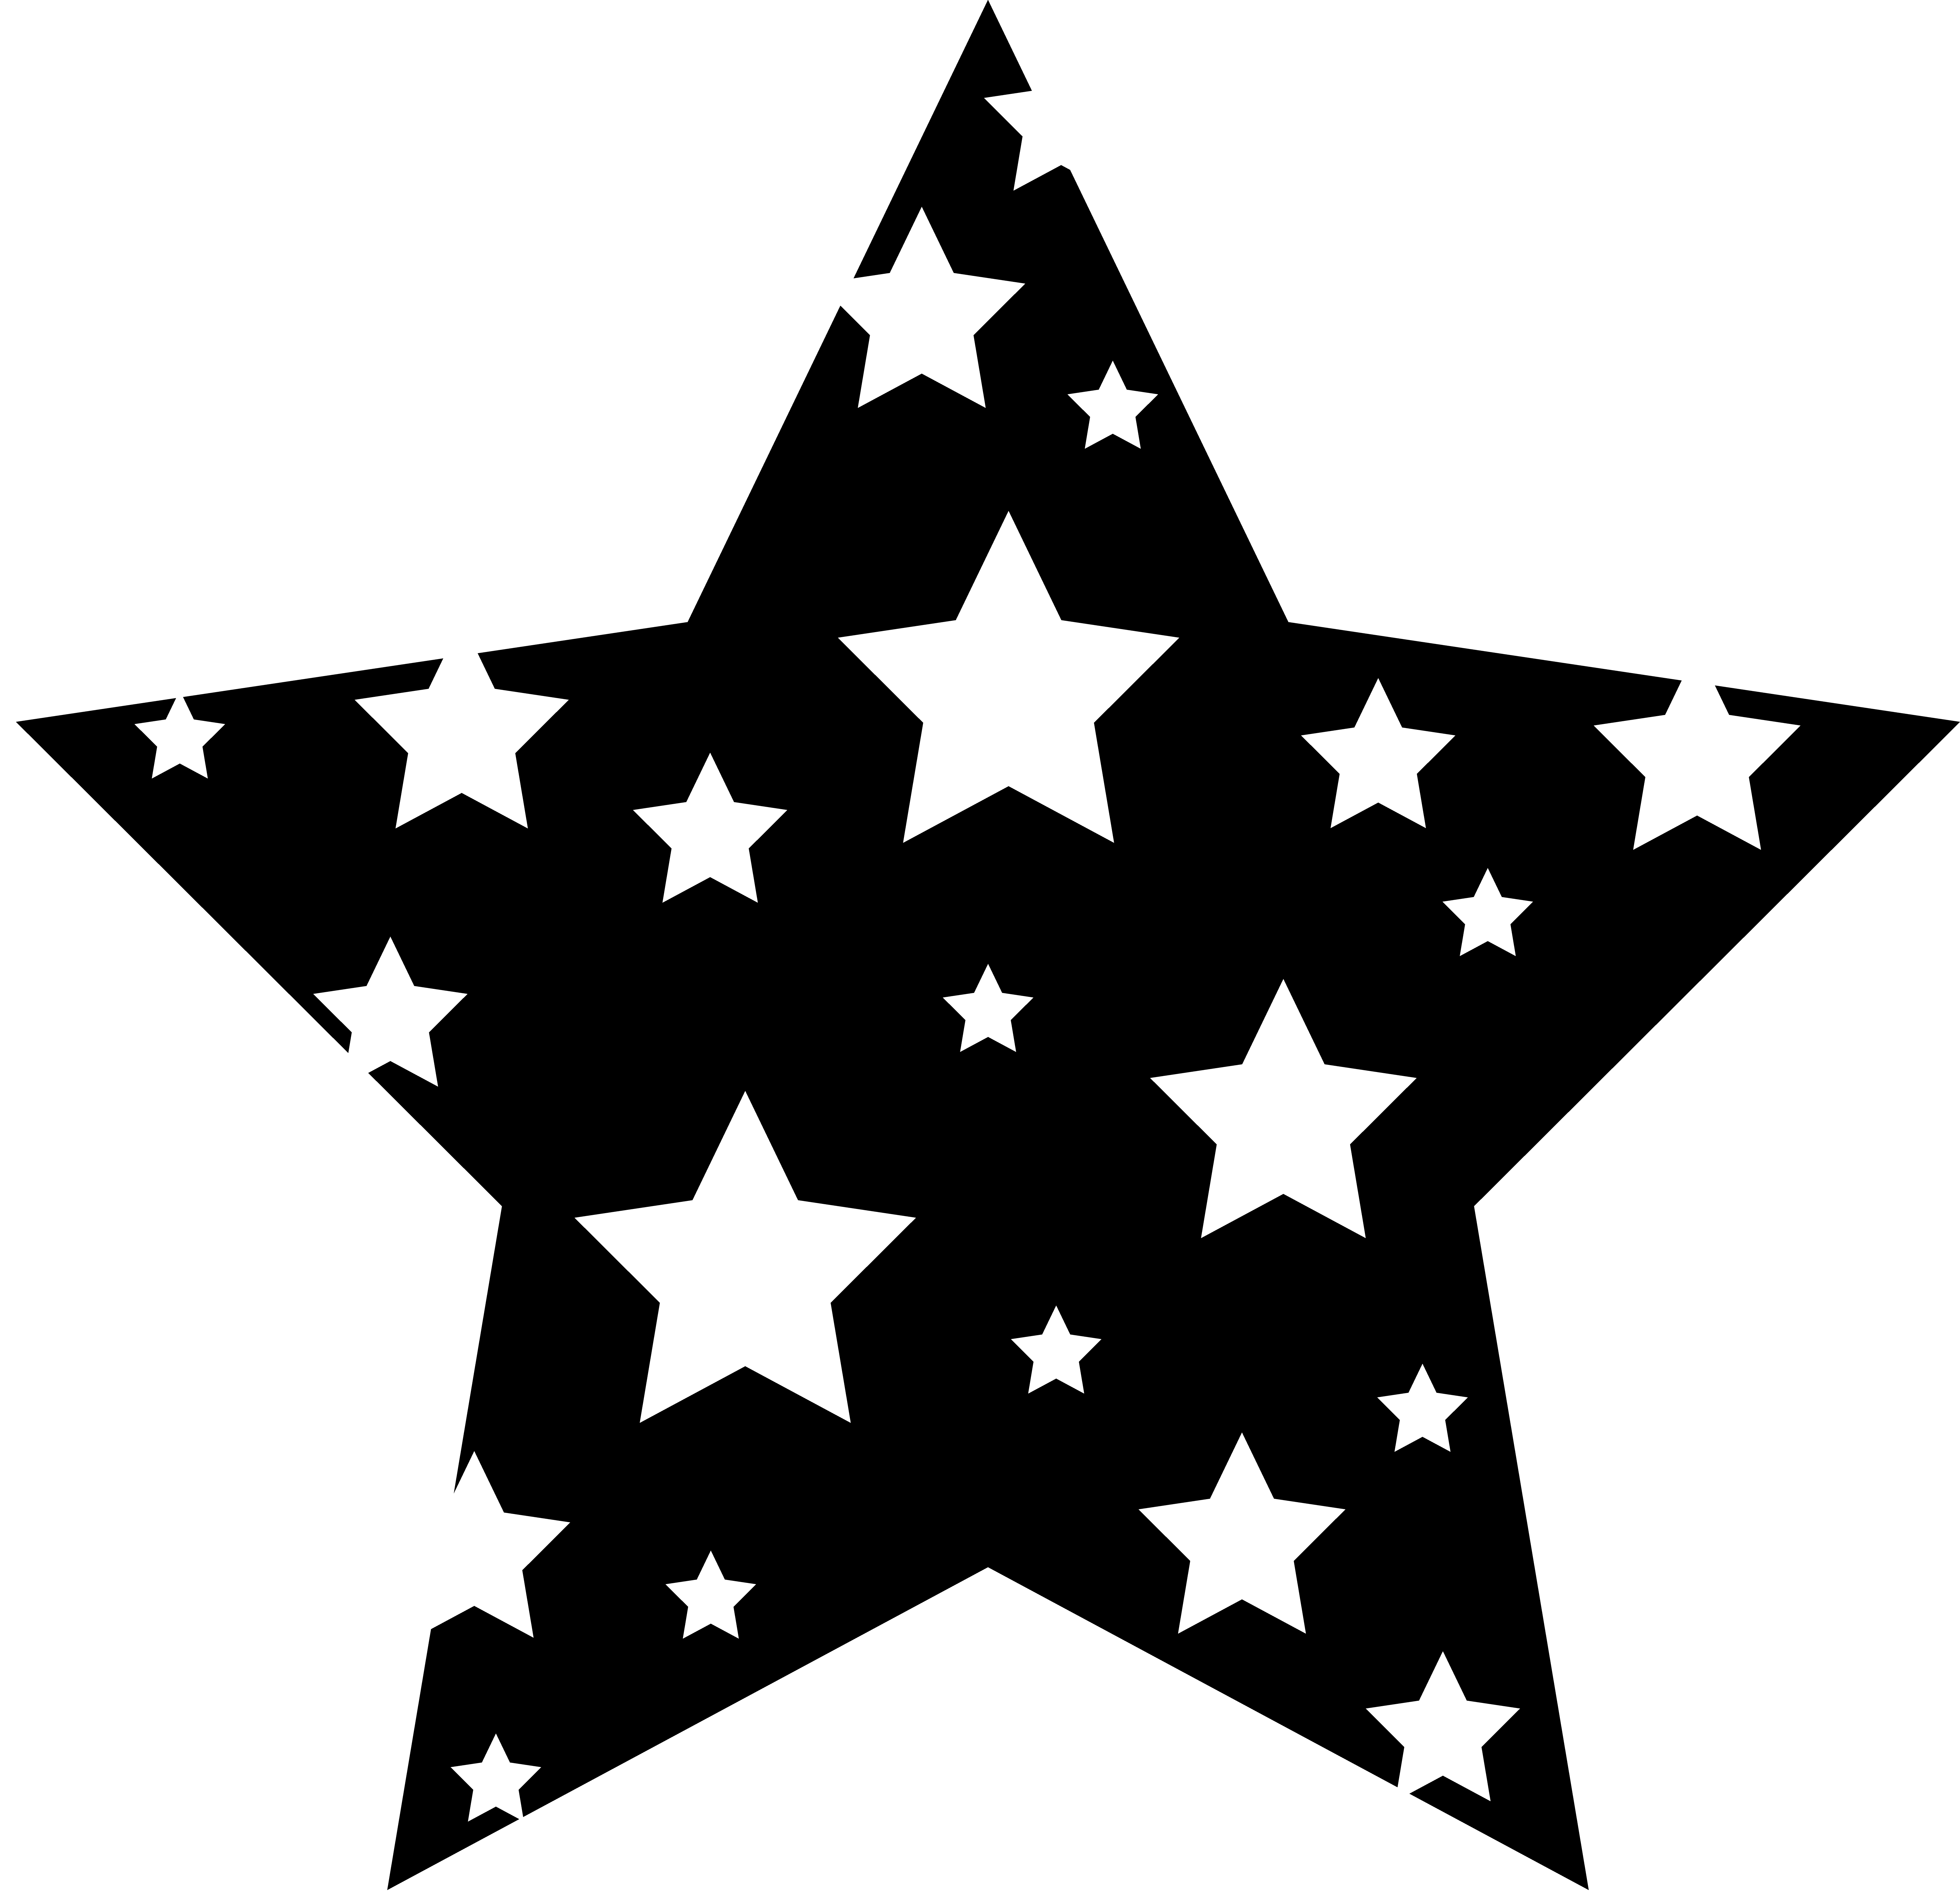 Red White and Black Star Logo - Free Pictures Of White Stars, Download Free Clip Art, Free Clip Art ...